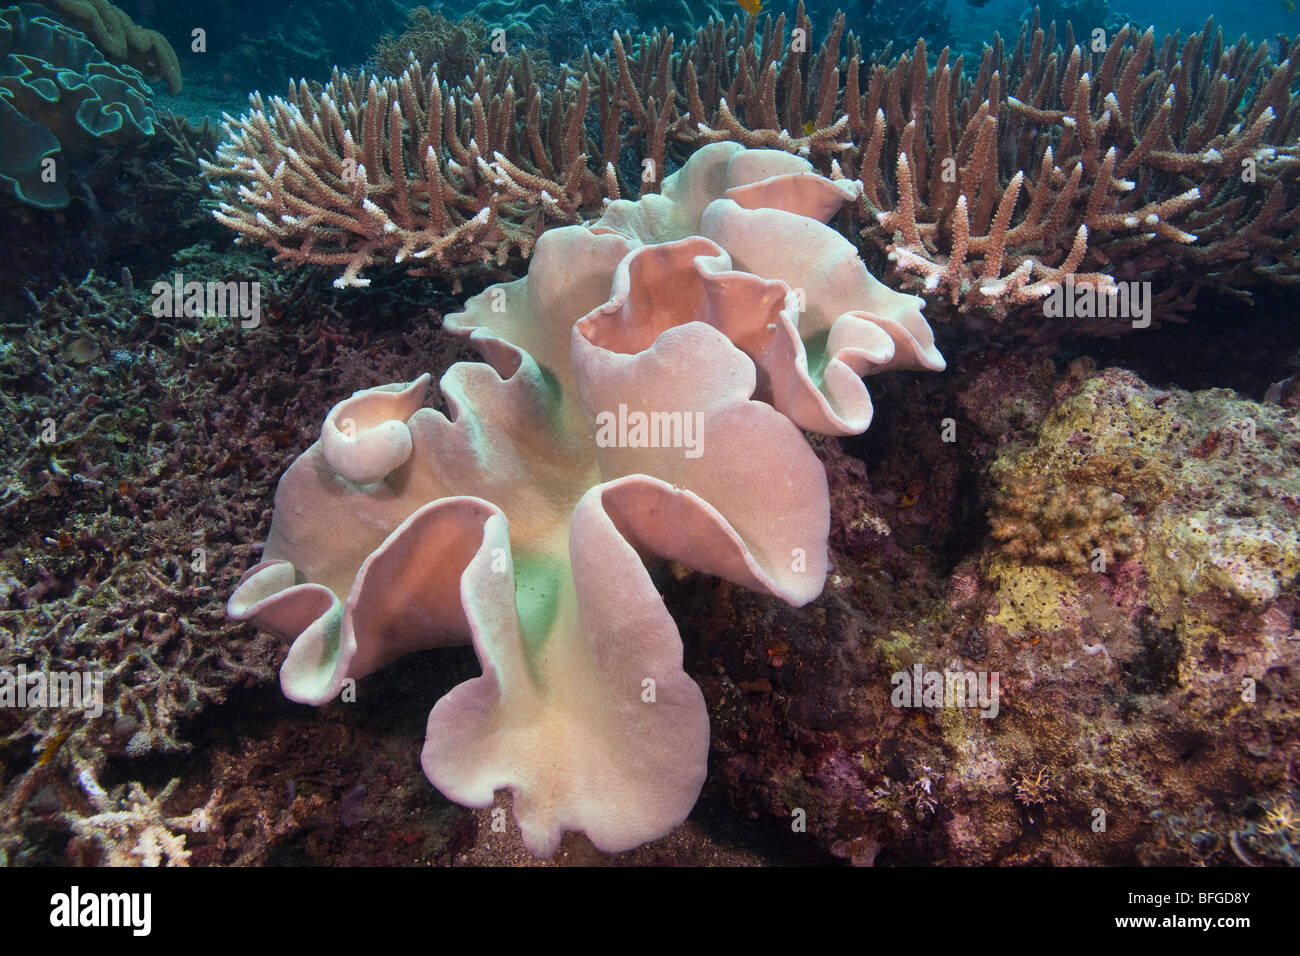 Coral reef scene, Lembeh Strait, North Sulawesi, Indonesia Stock Photo